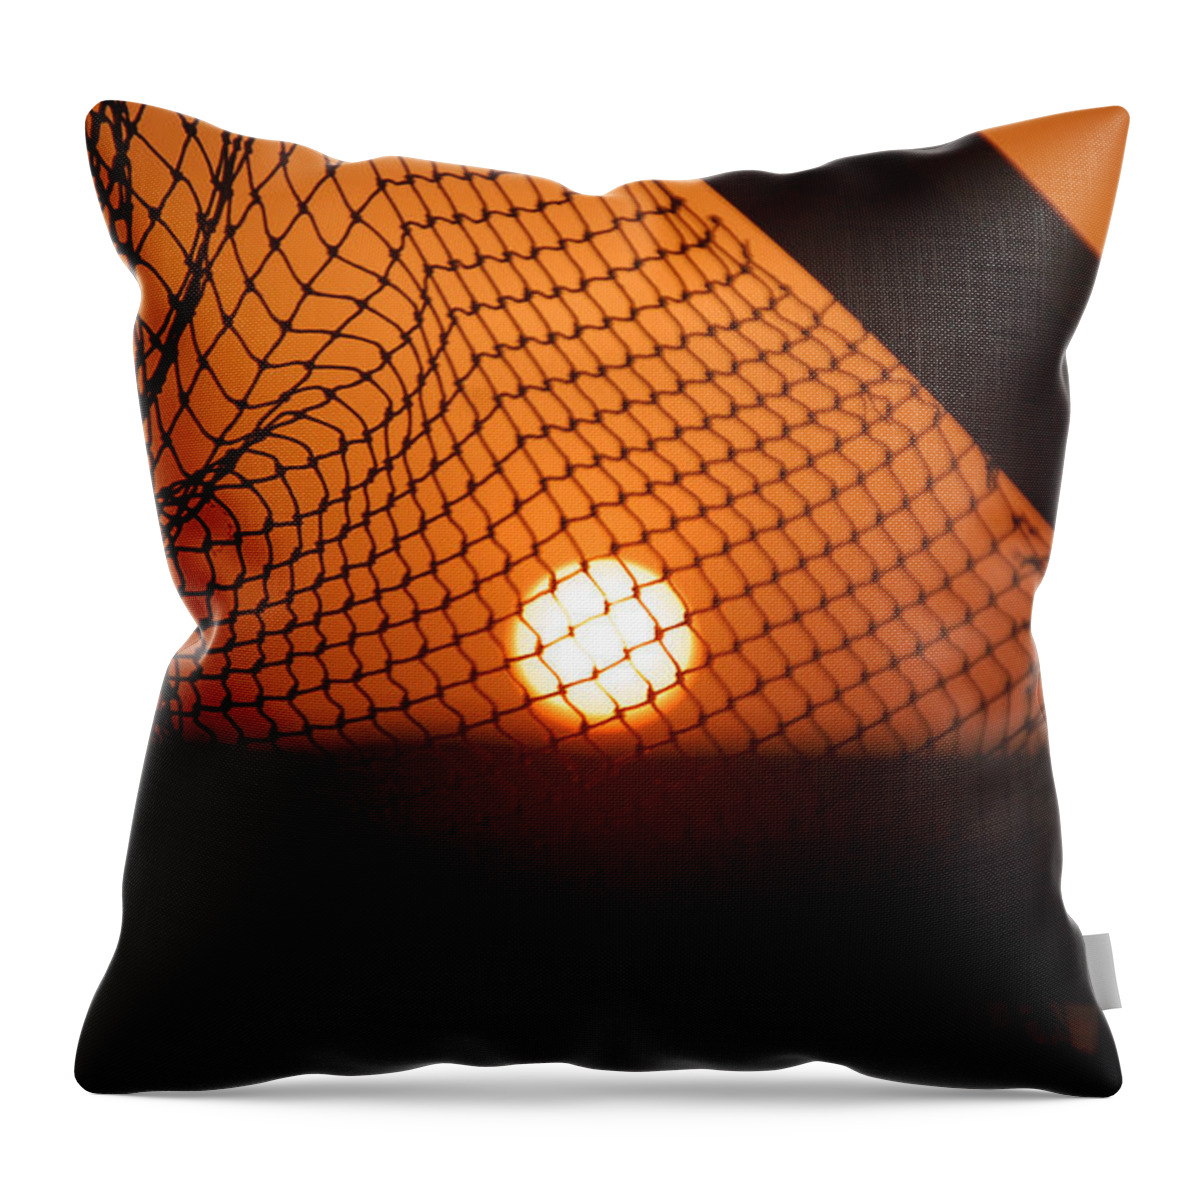 Net Throw Pillow featuring the photograph The Netted Sun by Leticia Latocki